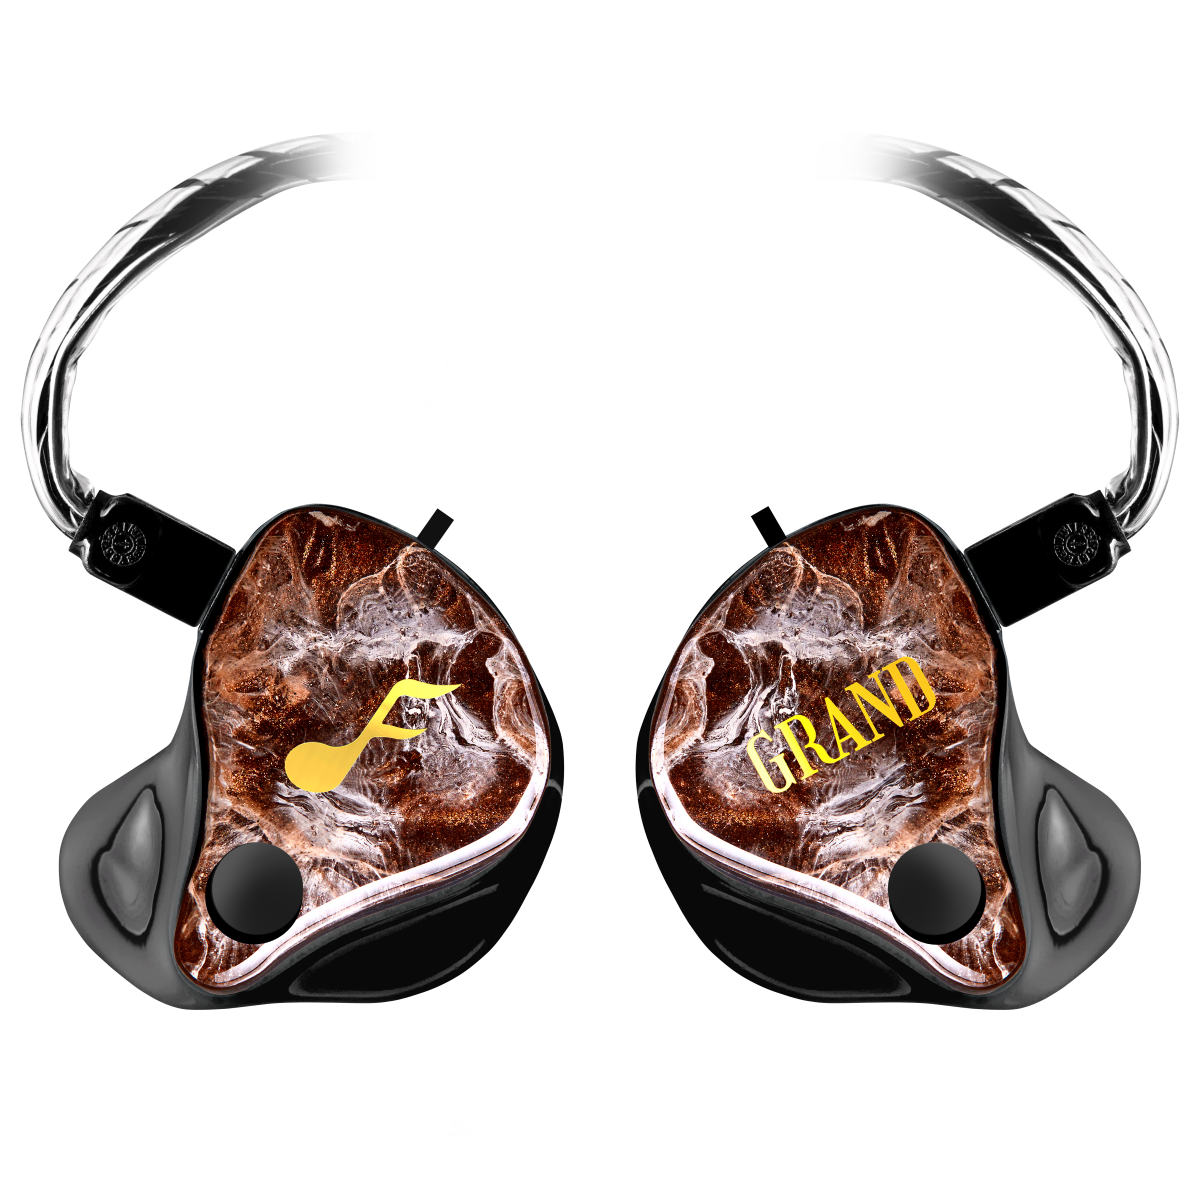 GRAND Maestro Custom IEM - Prices from 5771.00 to 5865.00